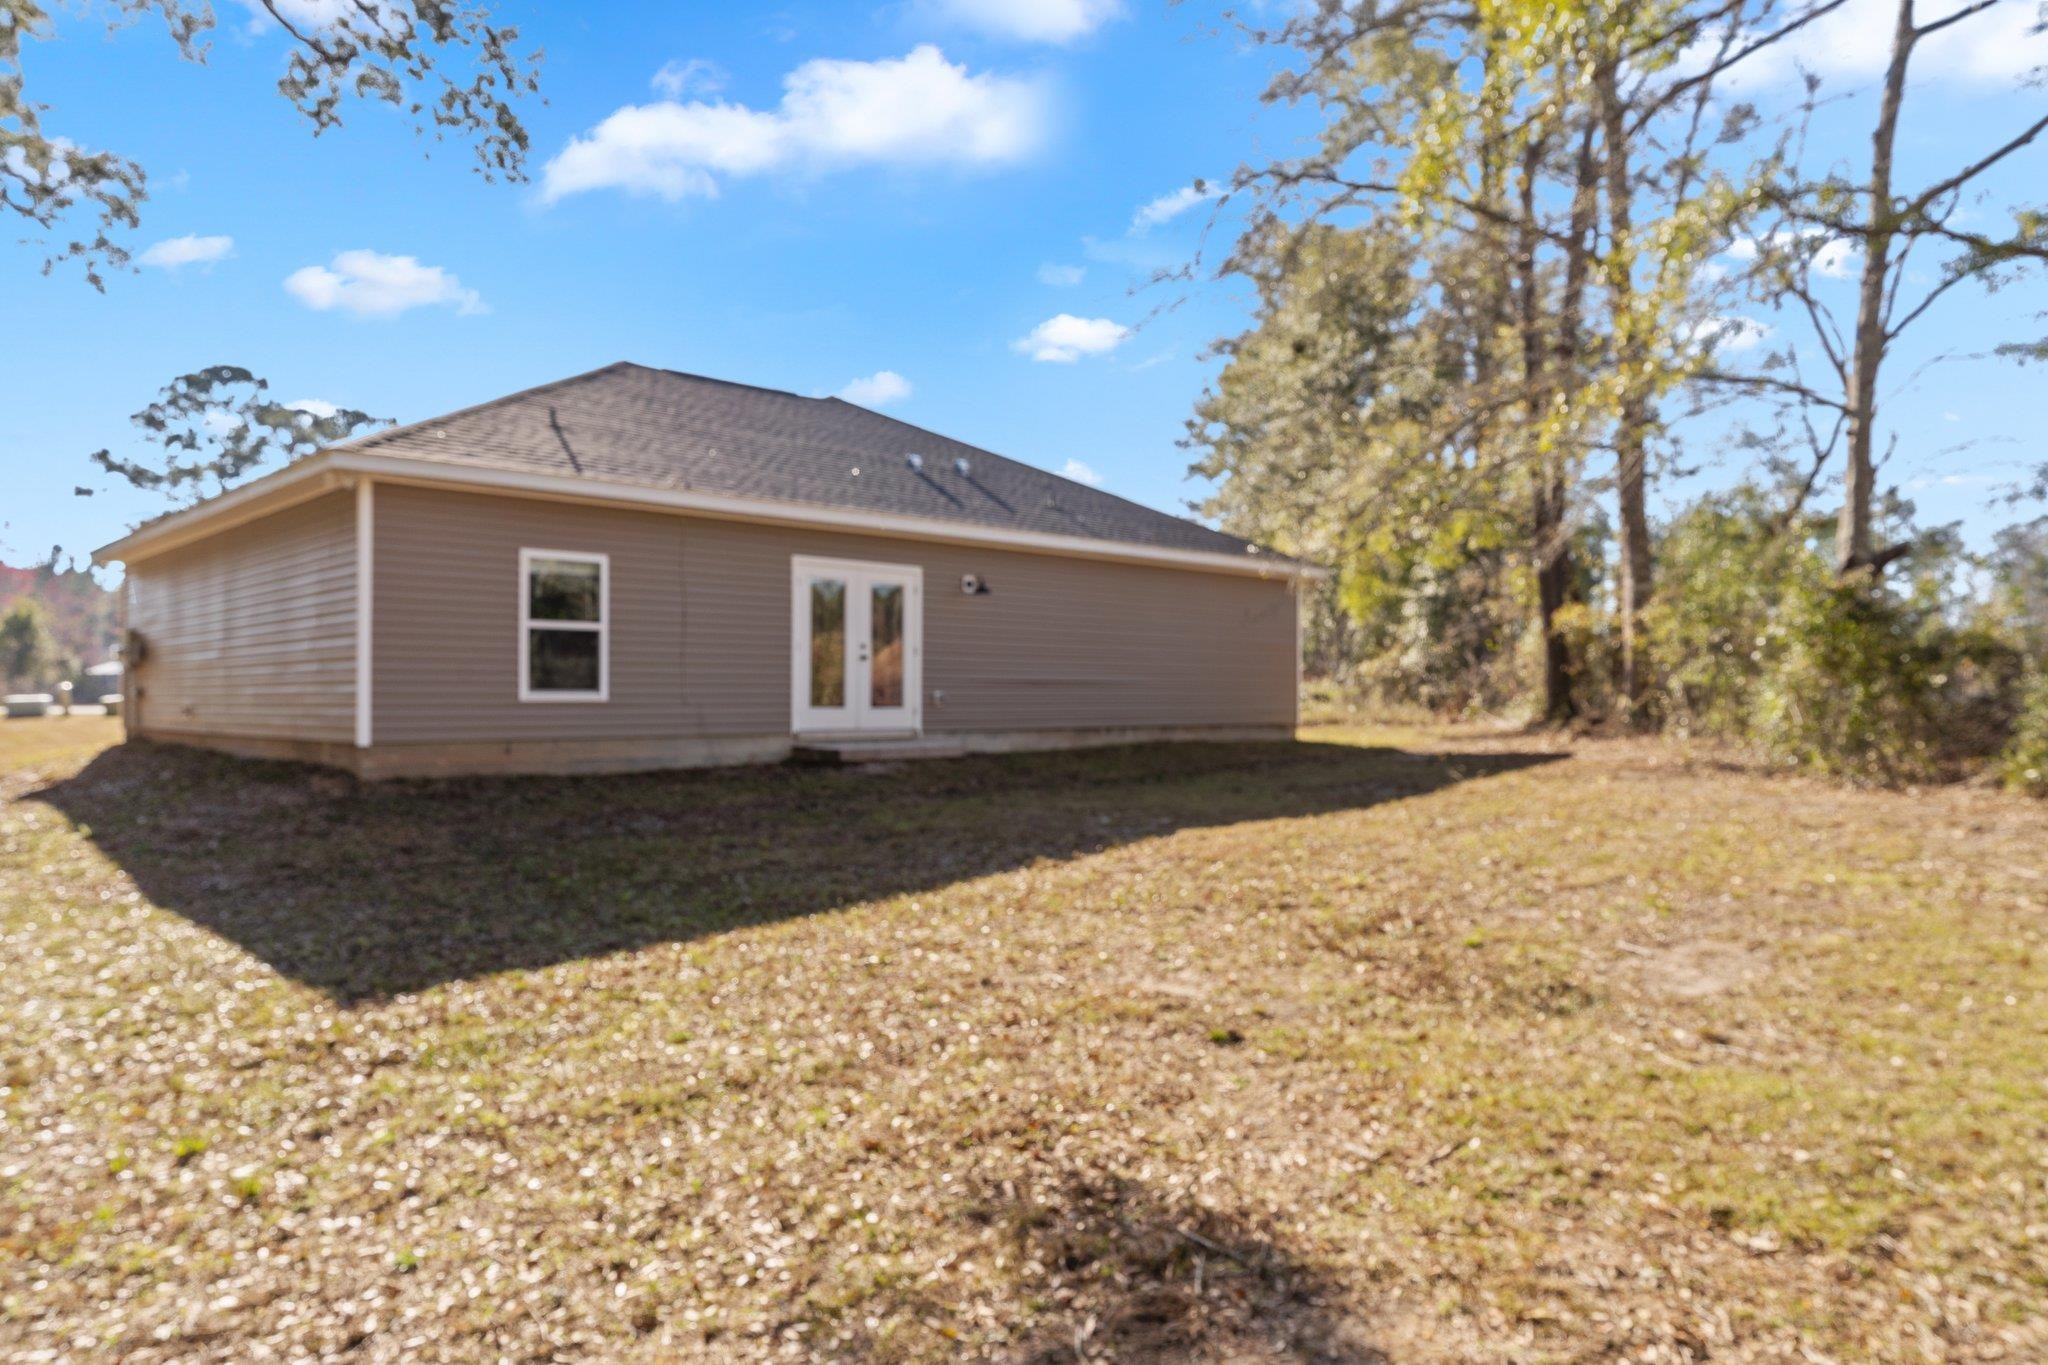 270 Kimberly,MONTICELLO,Florida 32344,3 Bedrooms Bedrooms,2 BathroomsBathrooms,Detached single family,270 Kimberly,369982